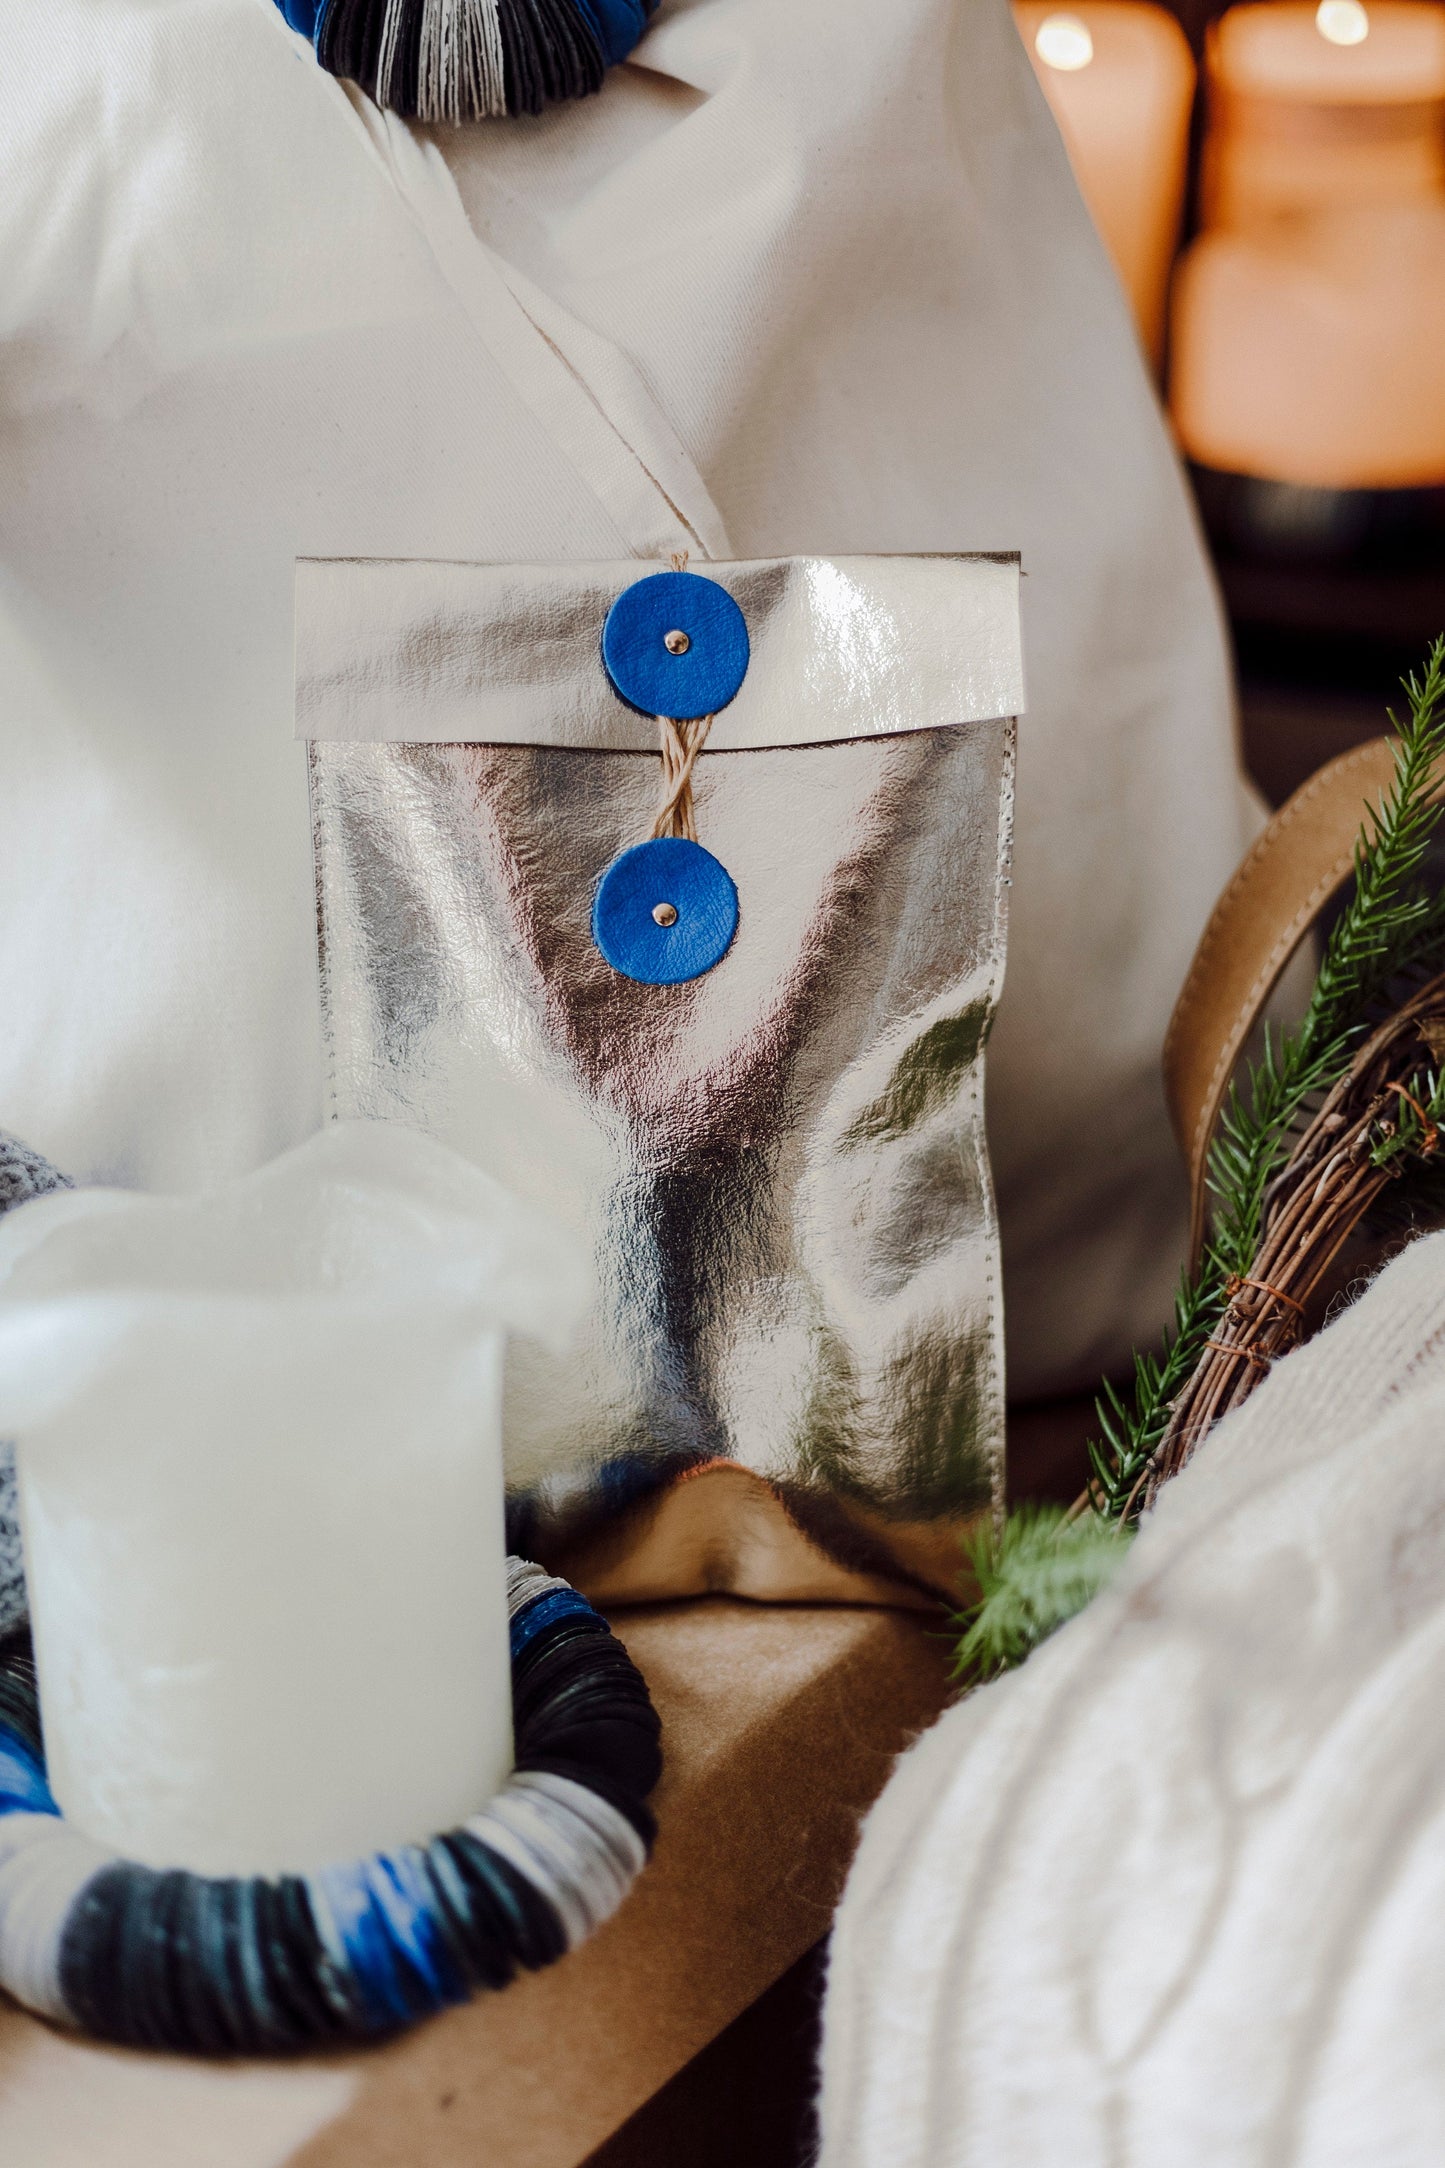 A metallic gold gift pouch featuring a twine closure with blue washable paper discs sits in a home setting. Also visible are two washable paper rings, one around a pillar candle and the other tied to a cotton sack.